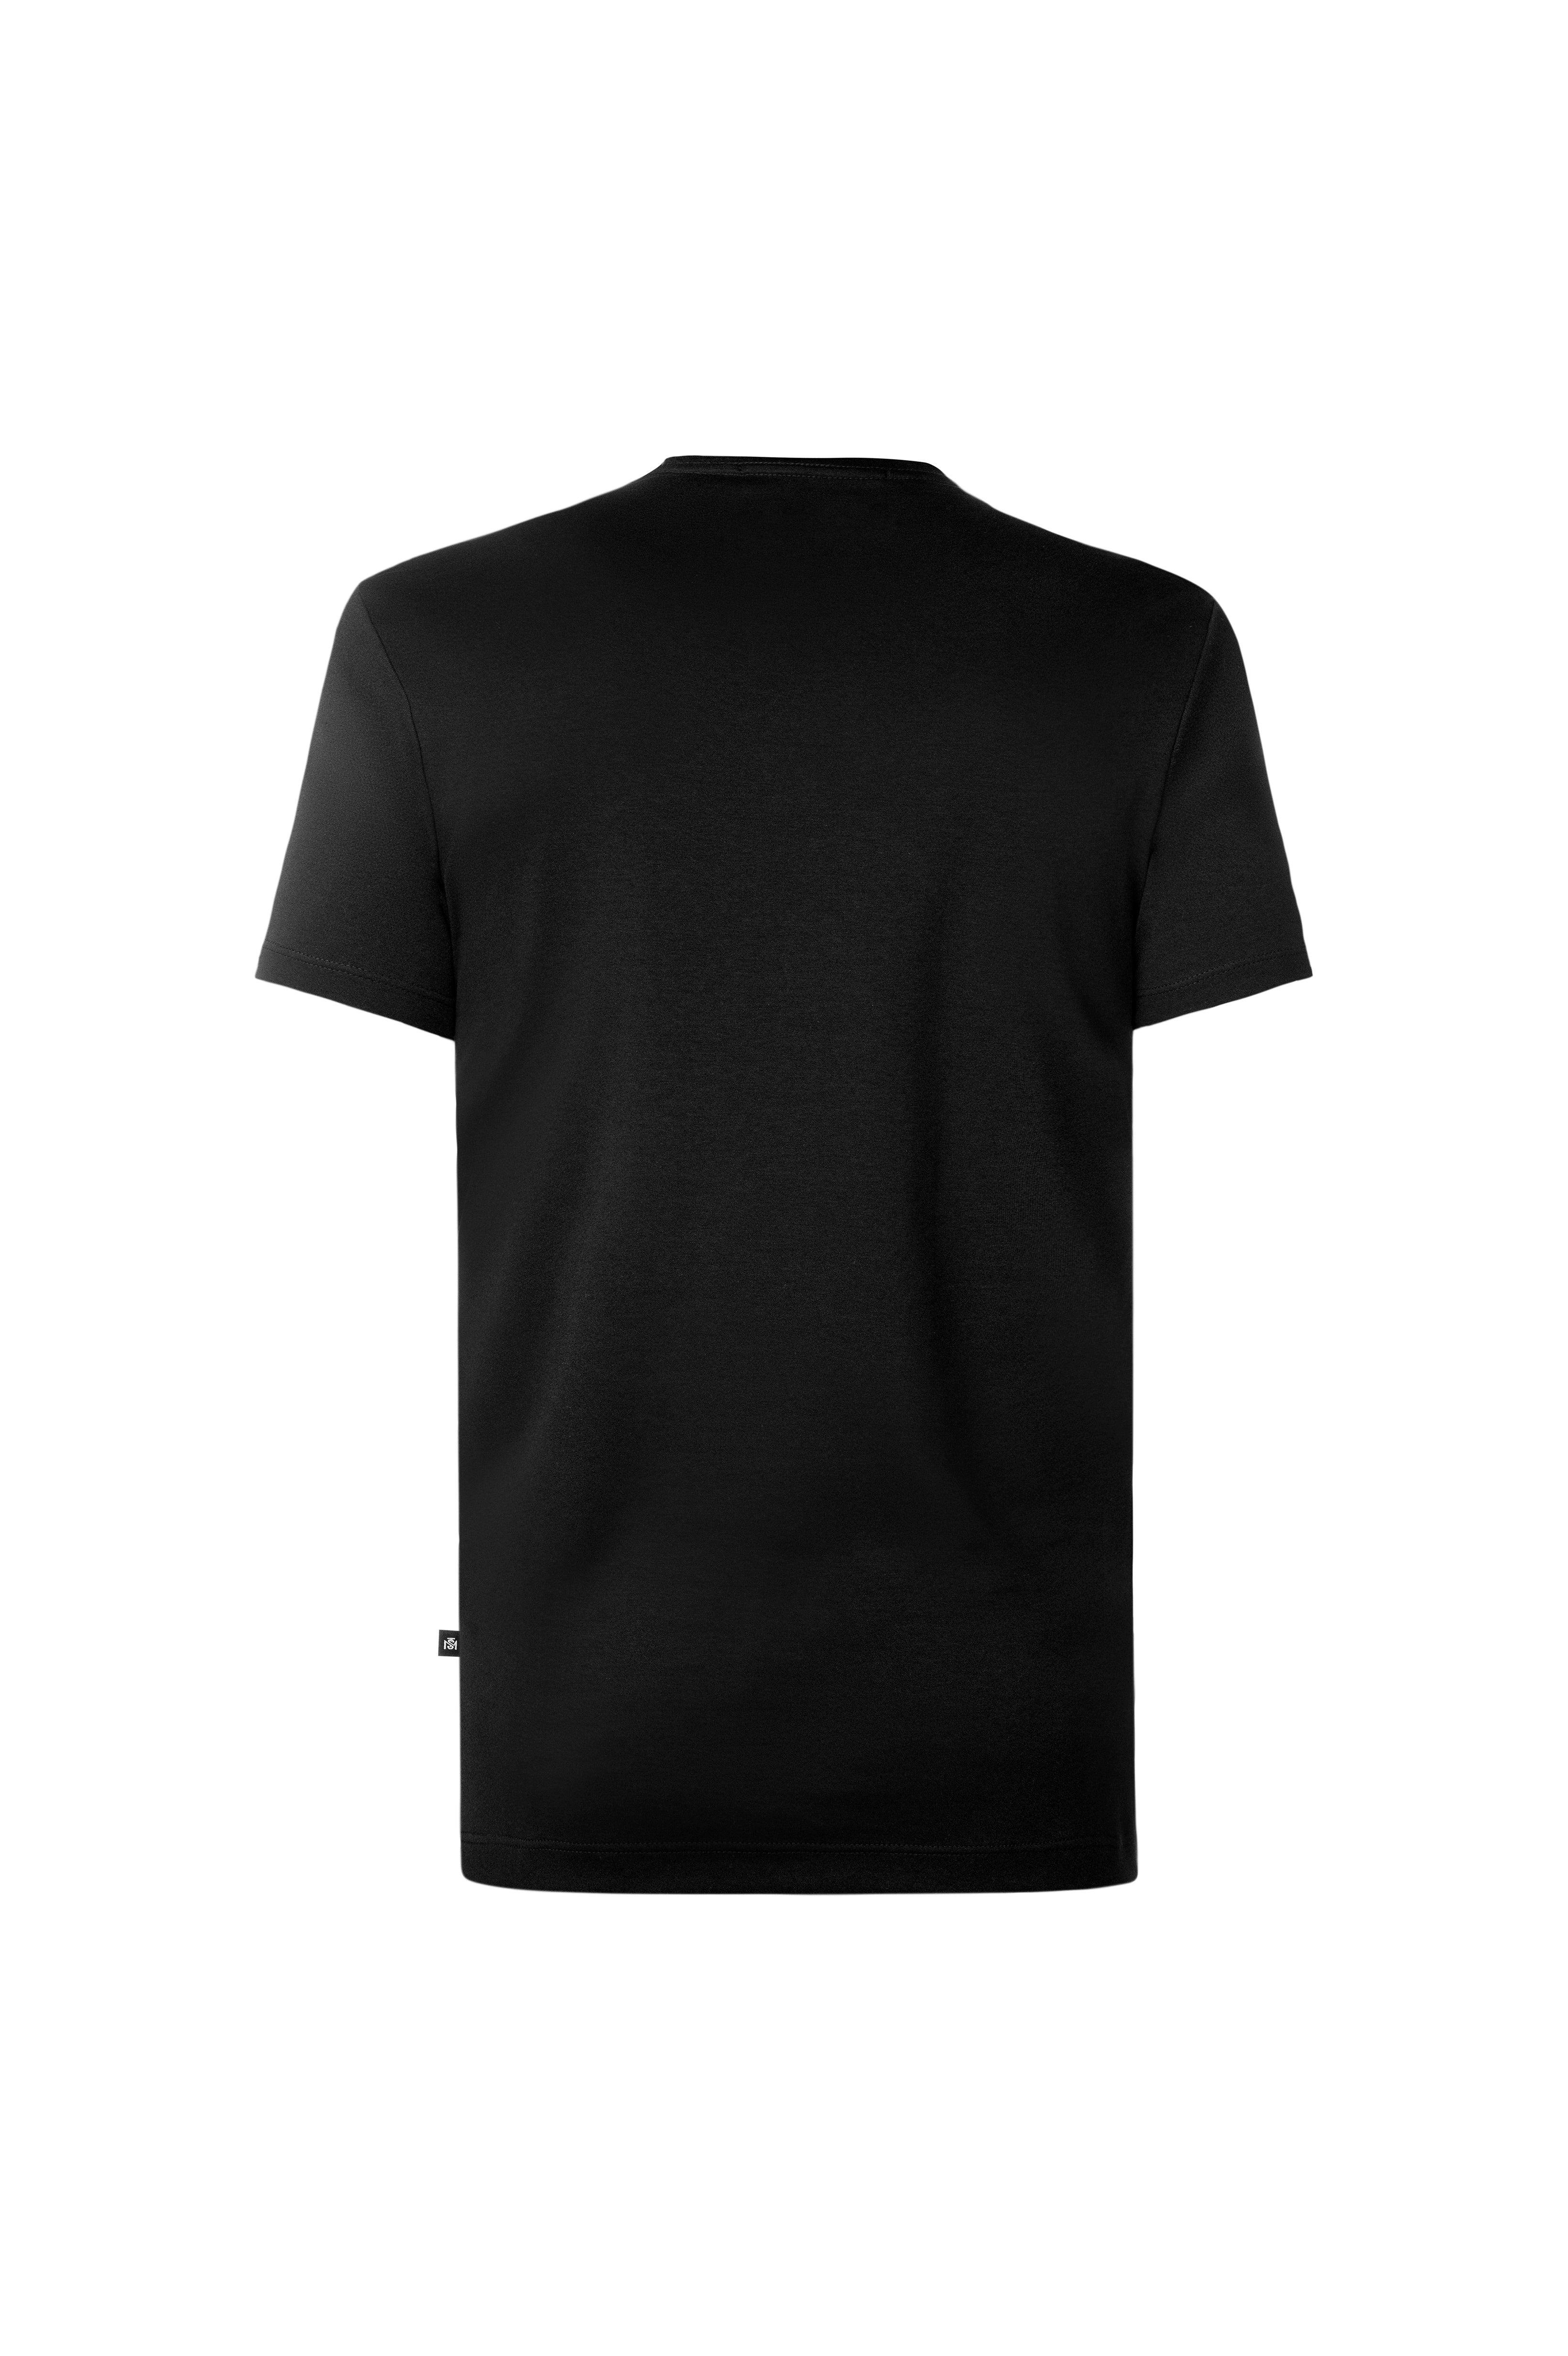 OLIYMPUS T-SHIRT BLACK | Monastery Couture